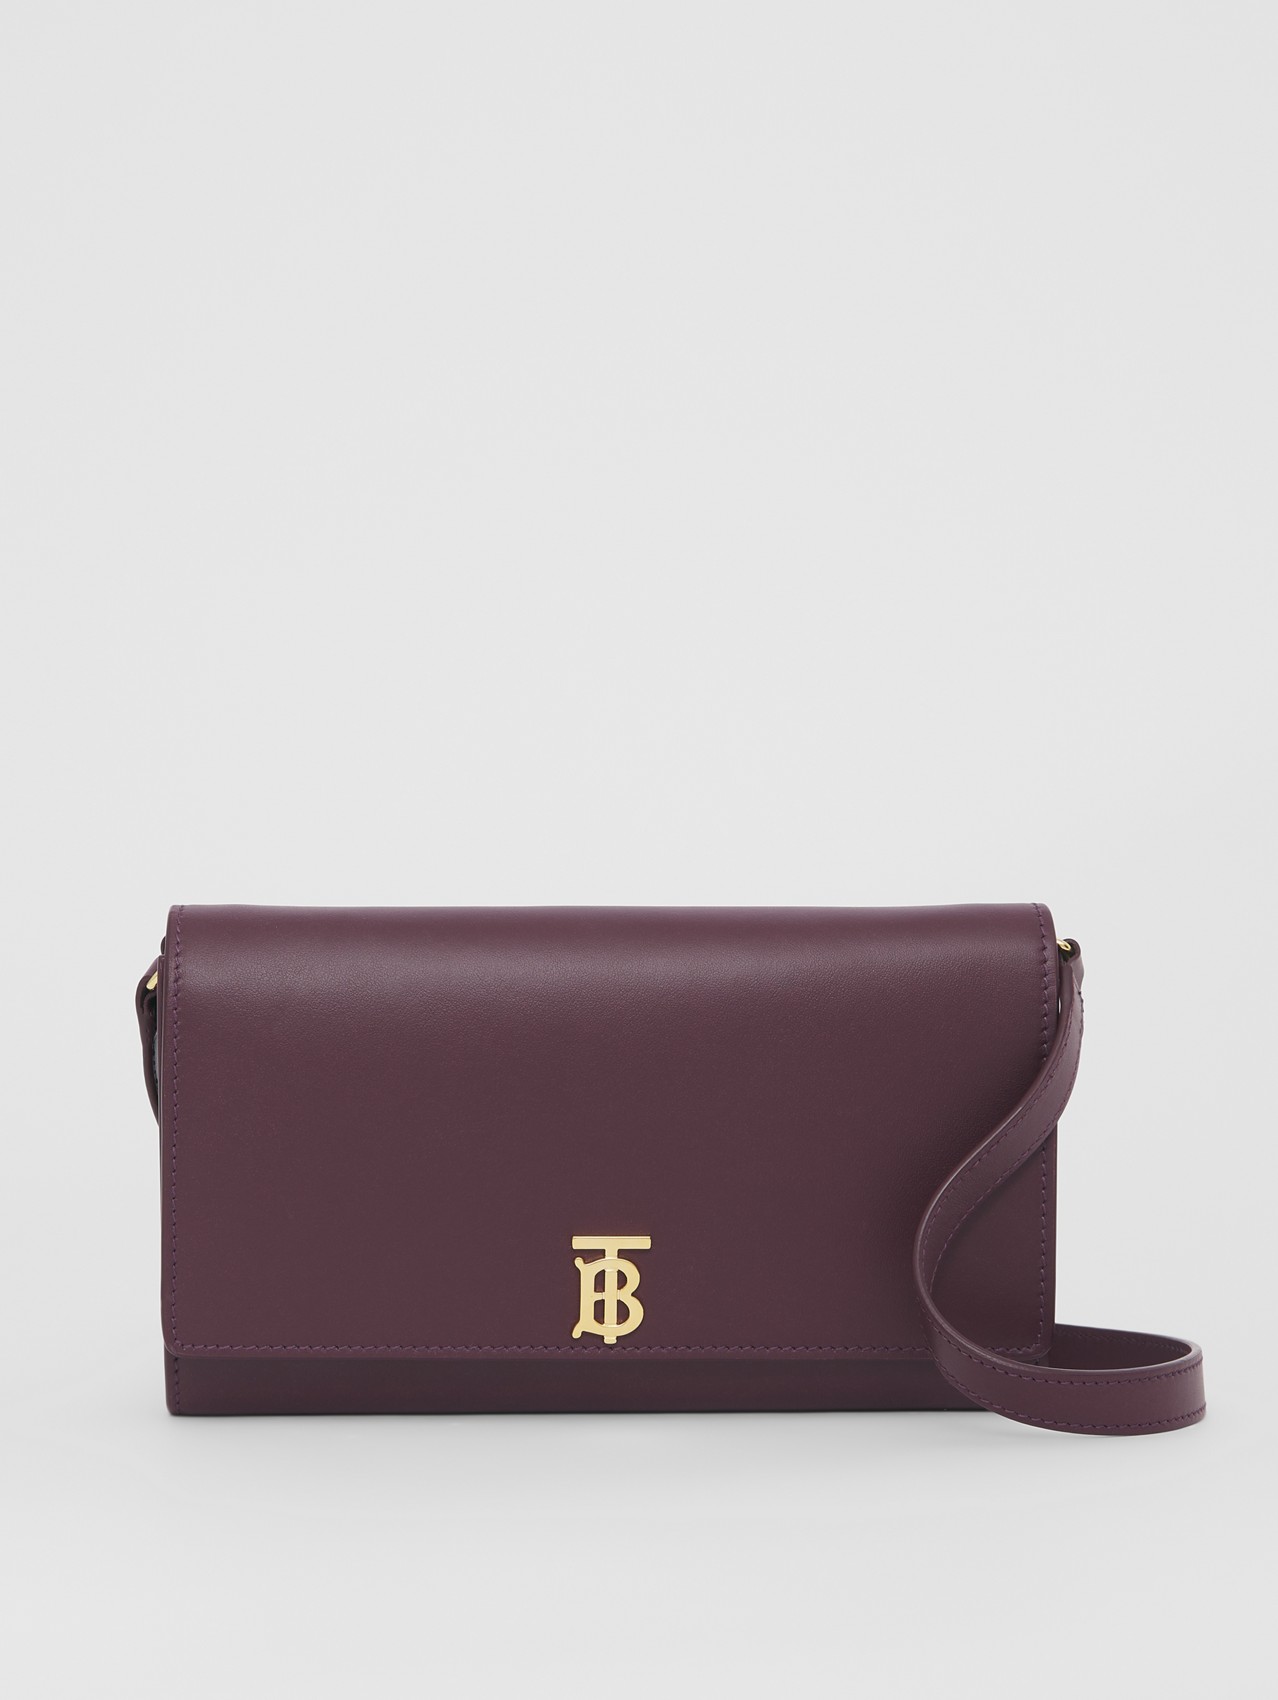 Monogram Motif Leather Wallet with Detachable Strap in Deep Maroon